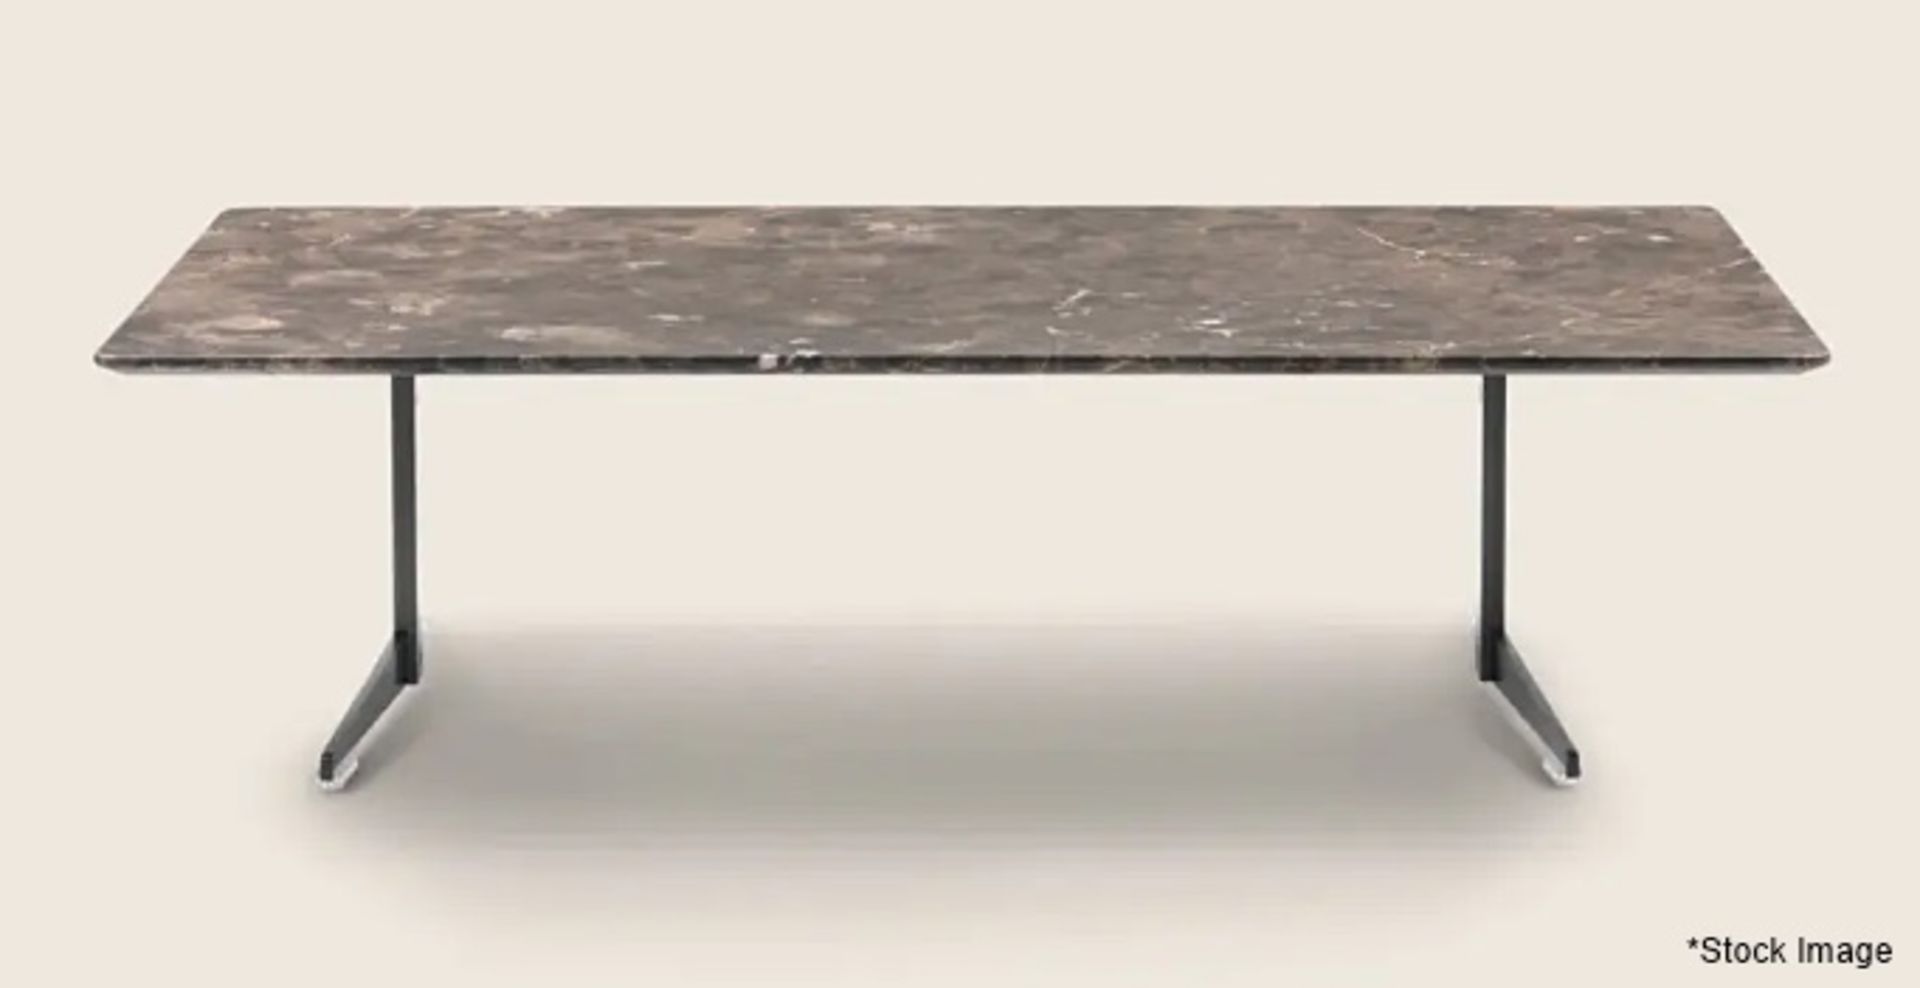 1 x  FLEXFORM 'Fly' Rectangular Marron Damasco Marble Dining Table Top - Sealed / Crated - Image 2 of 7